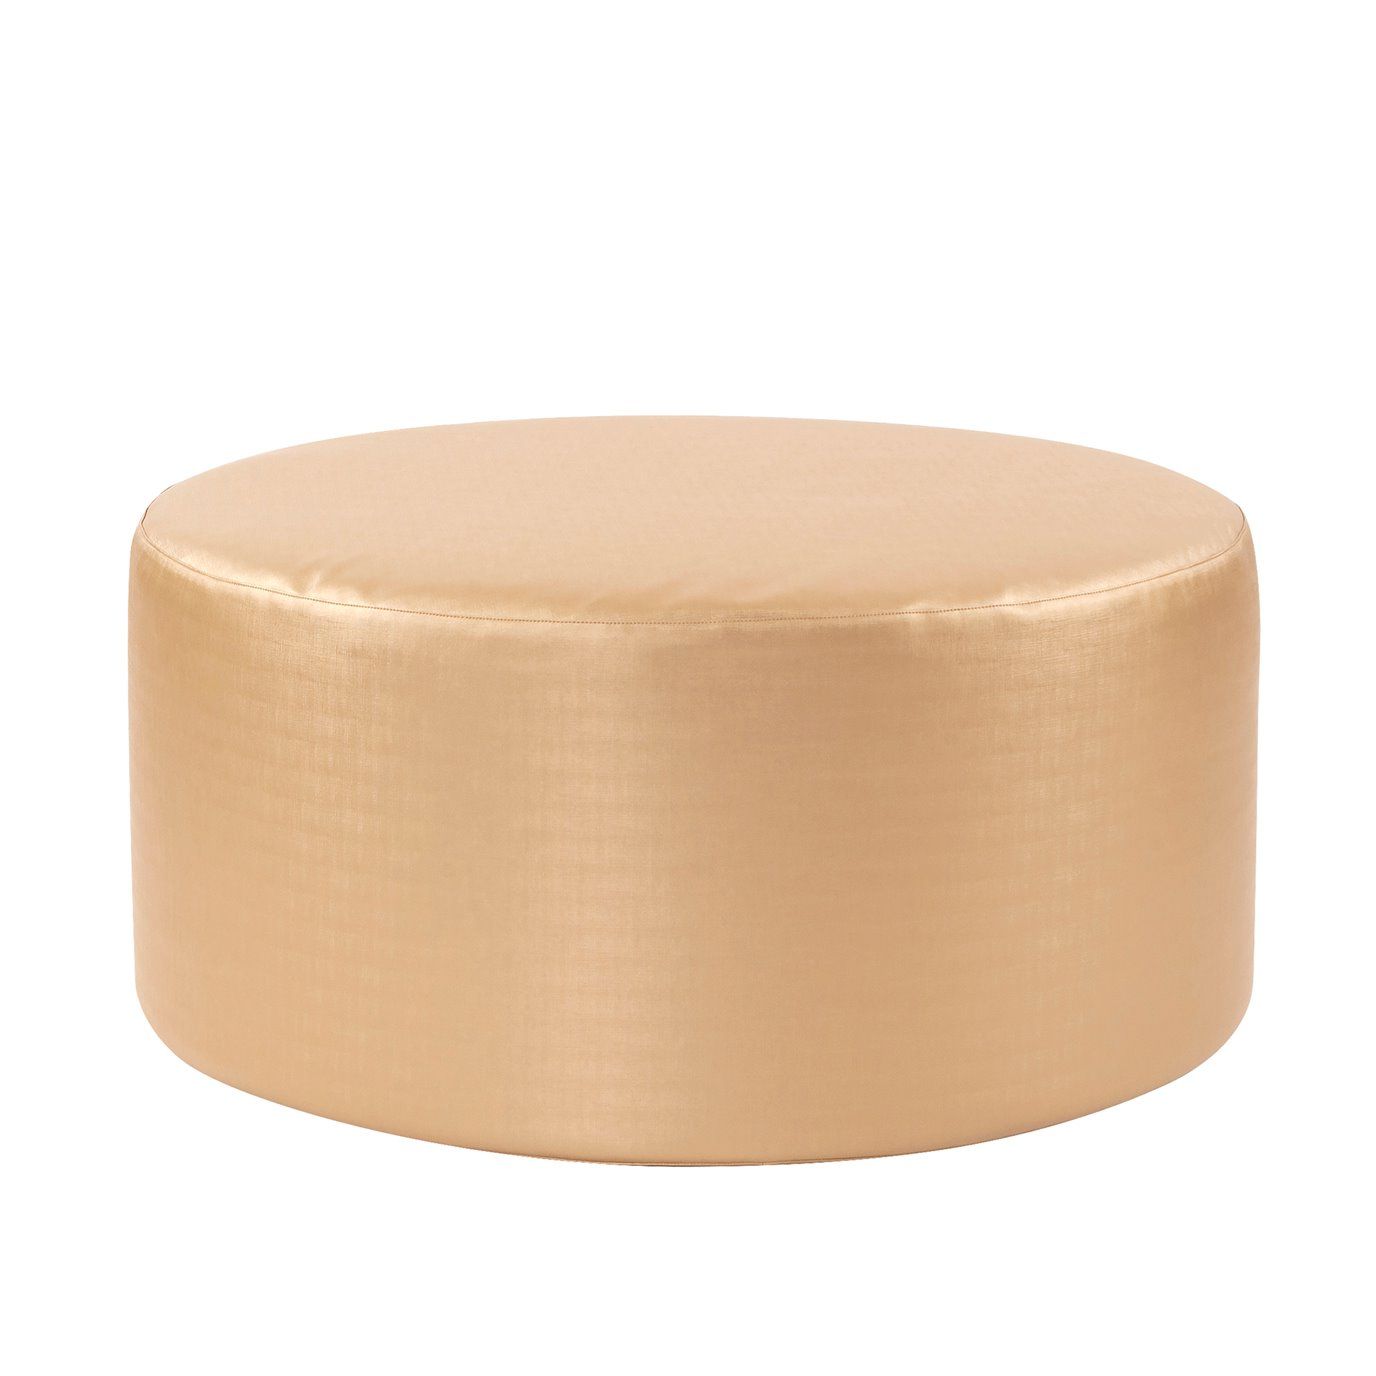 Howard Elliott Universal 36" Round Faux Leather Metallic Luxe Gold With Regard To Most Current Round Gold Faux Leather Ottomans With Pull Tab (View 2 of 10)